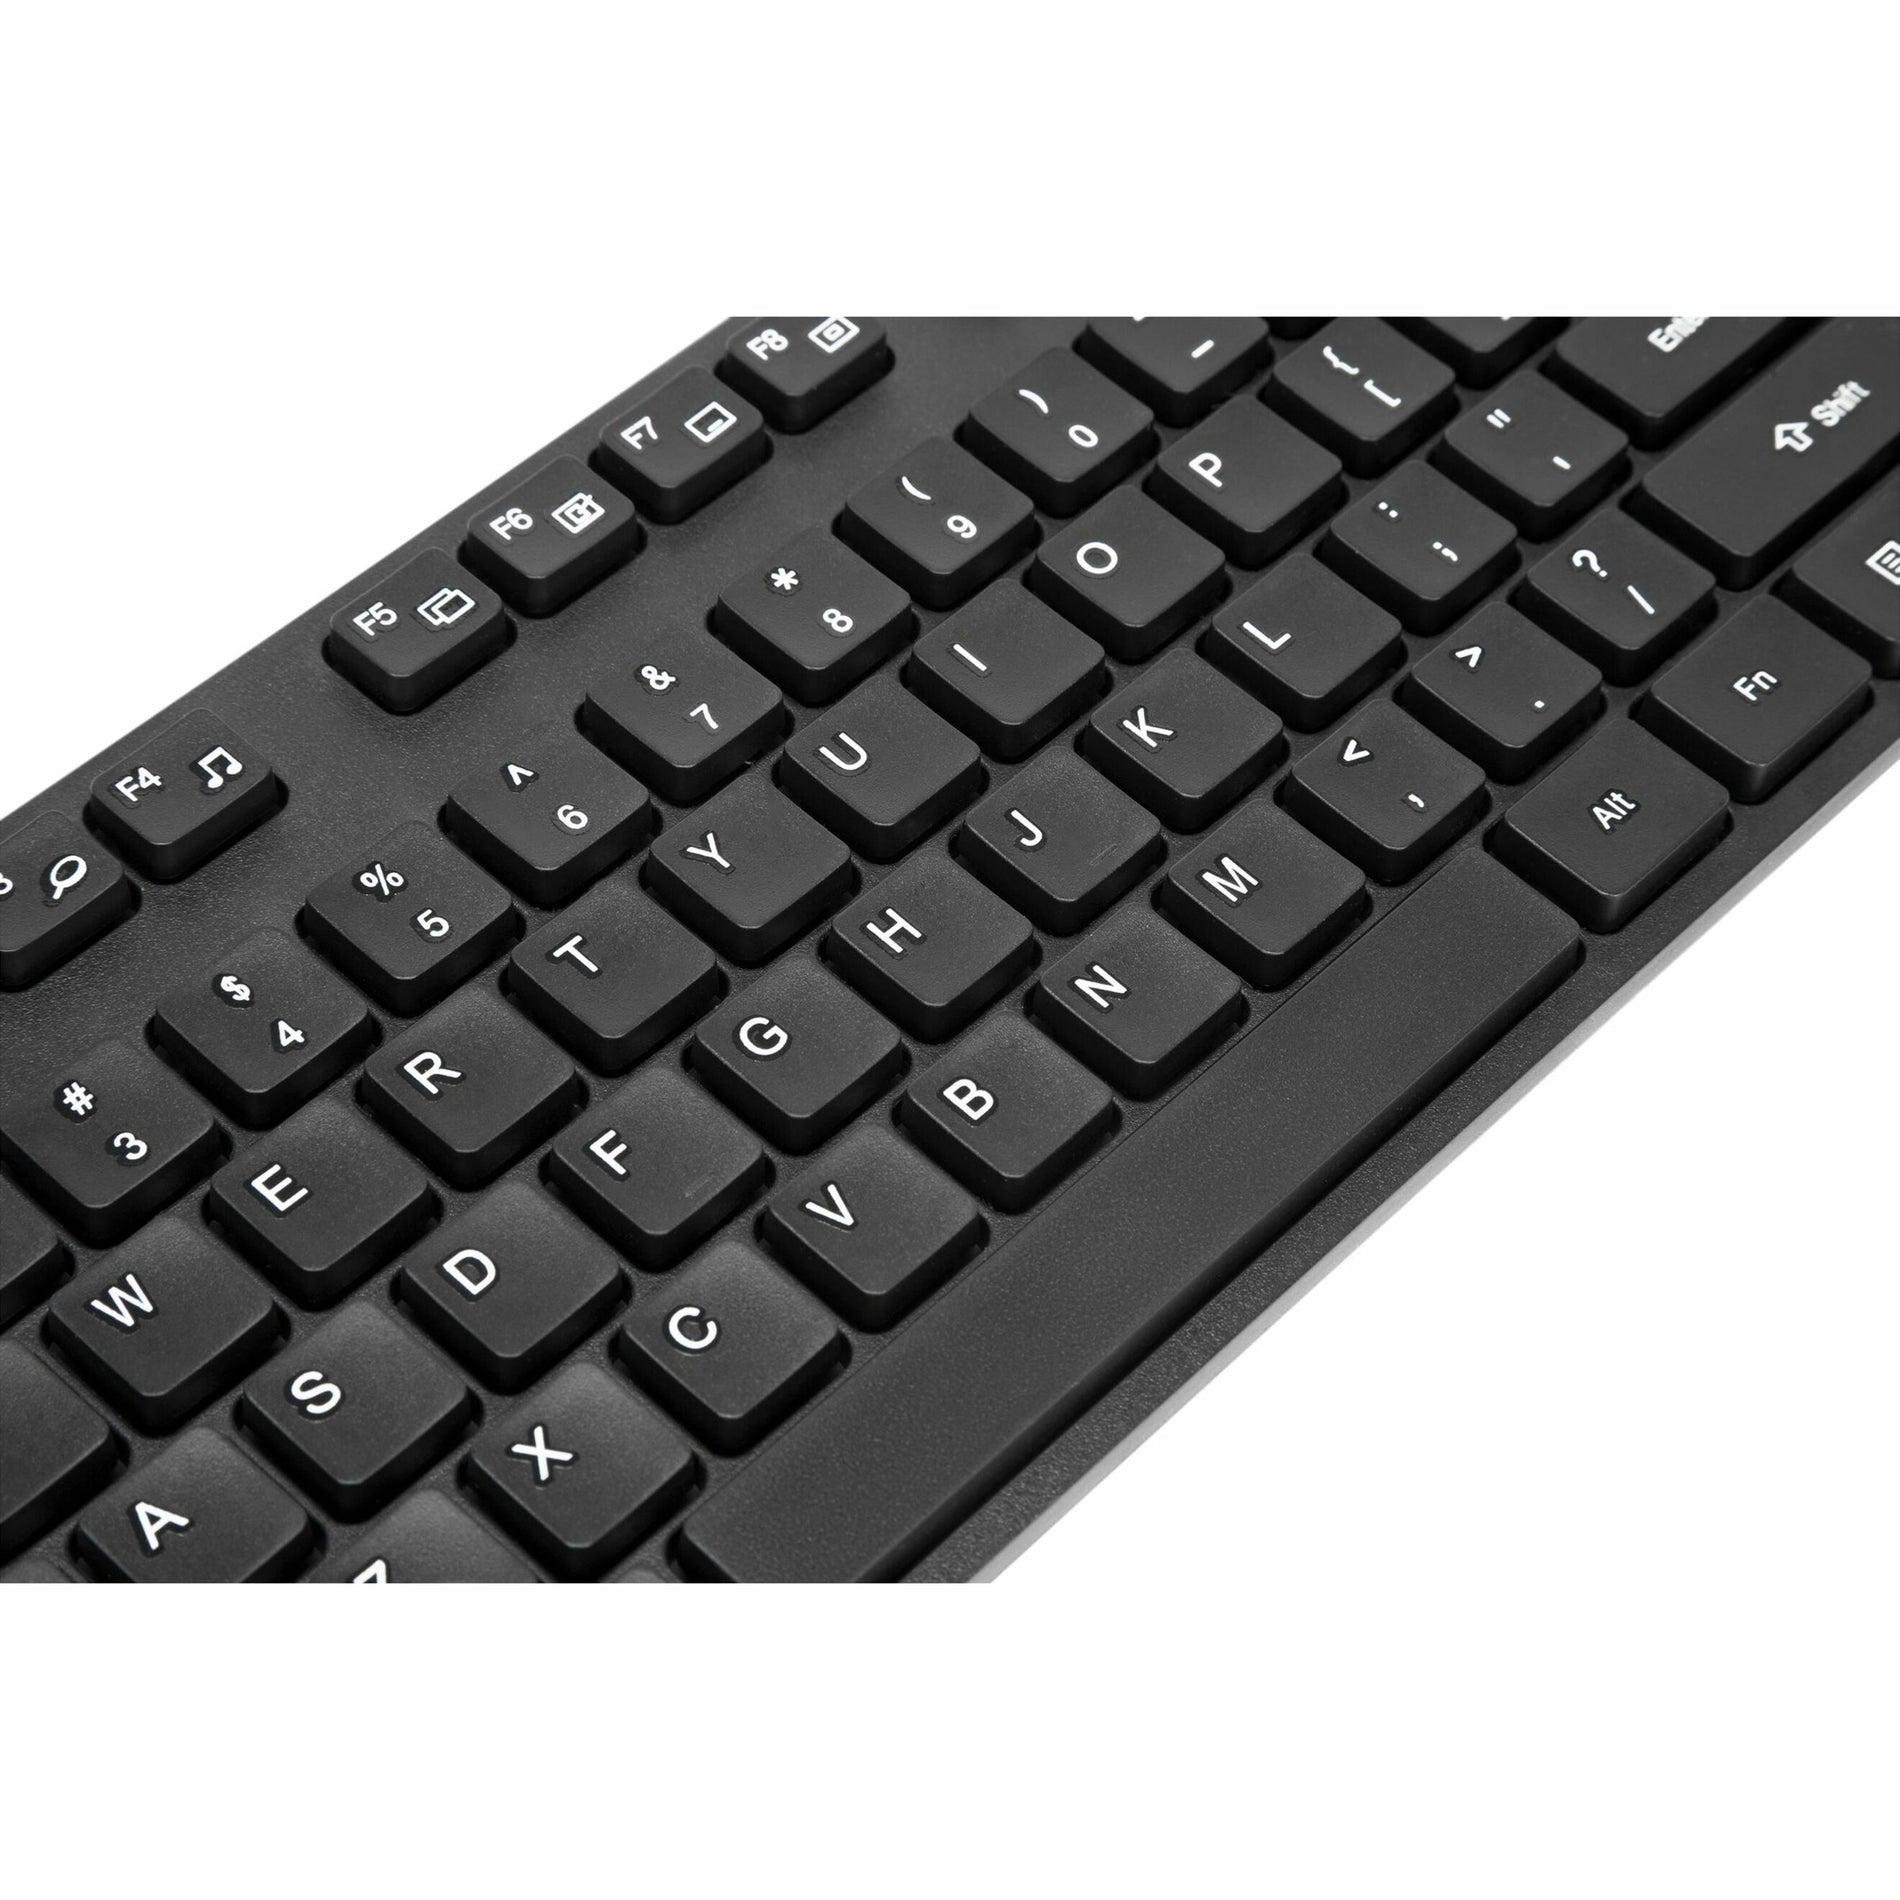 Targus AKB30AMUS Full-Size Antimicrobial Wired Keyboard, Plug & Play, USB Connectivity